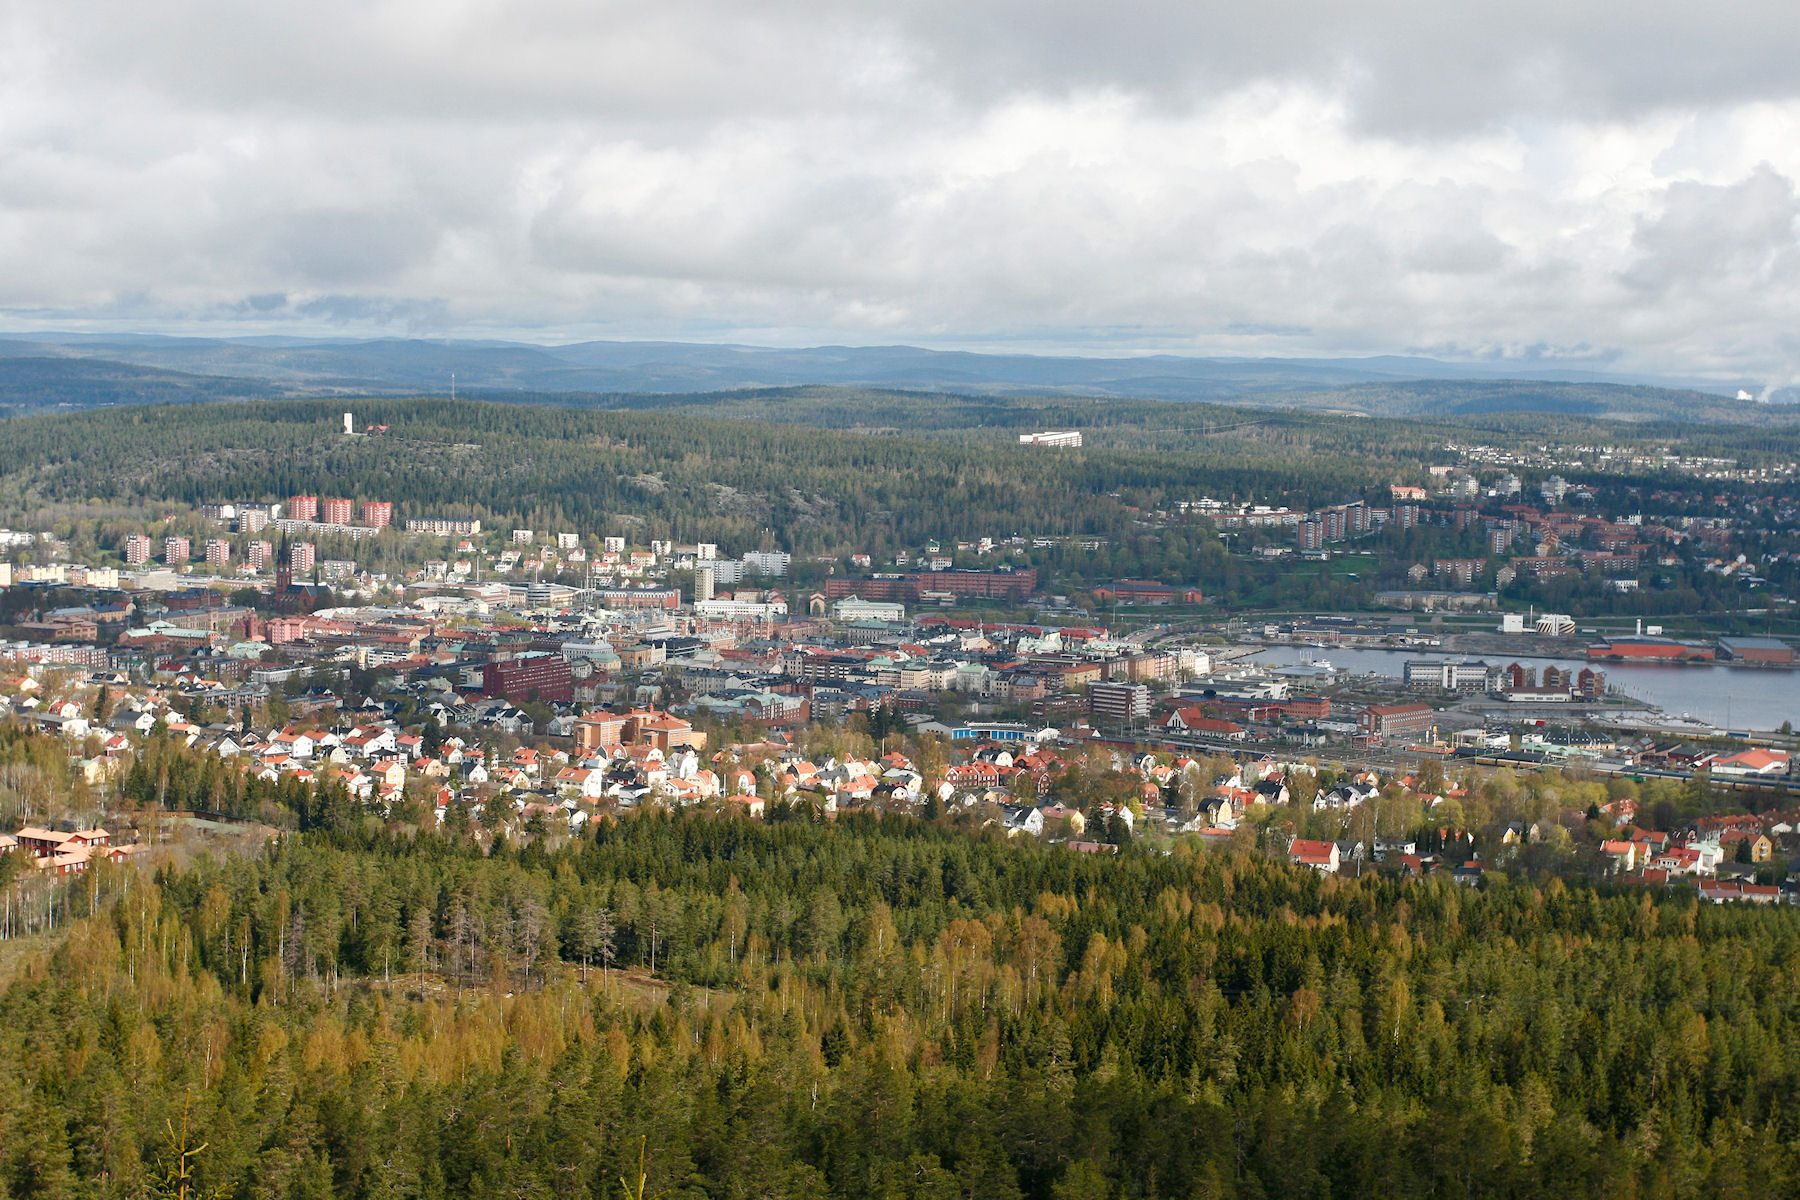 Centre of Sundsvall (Photo by Marcel Burger)